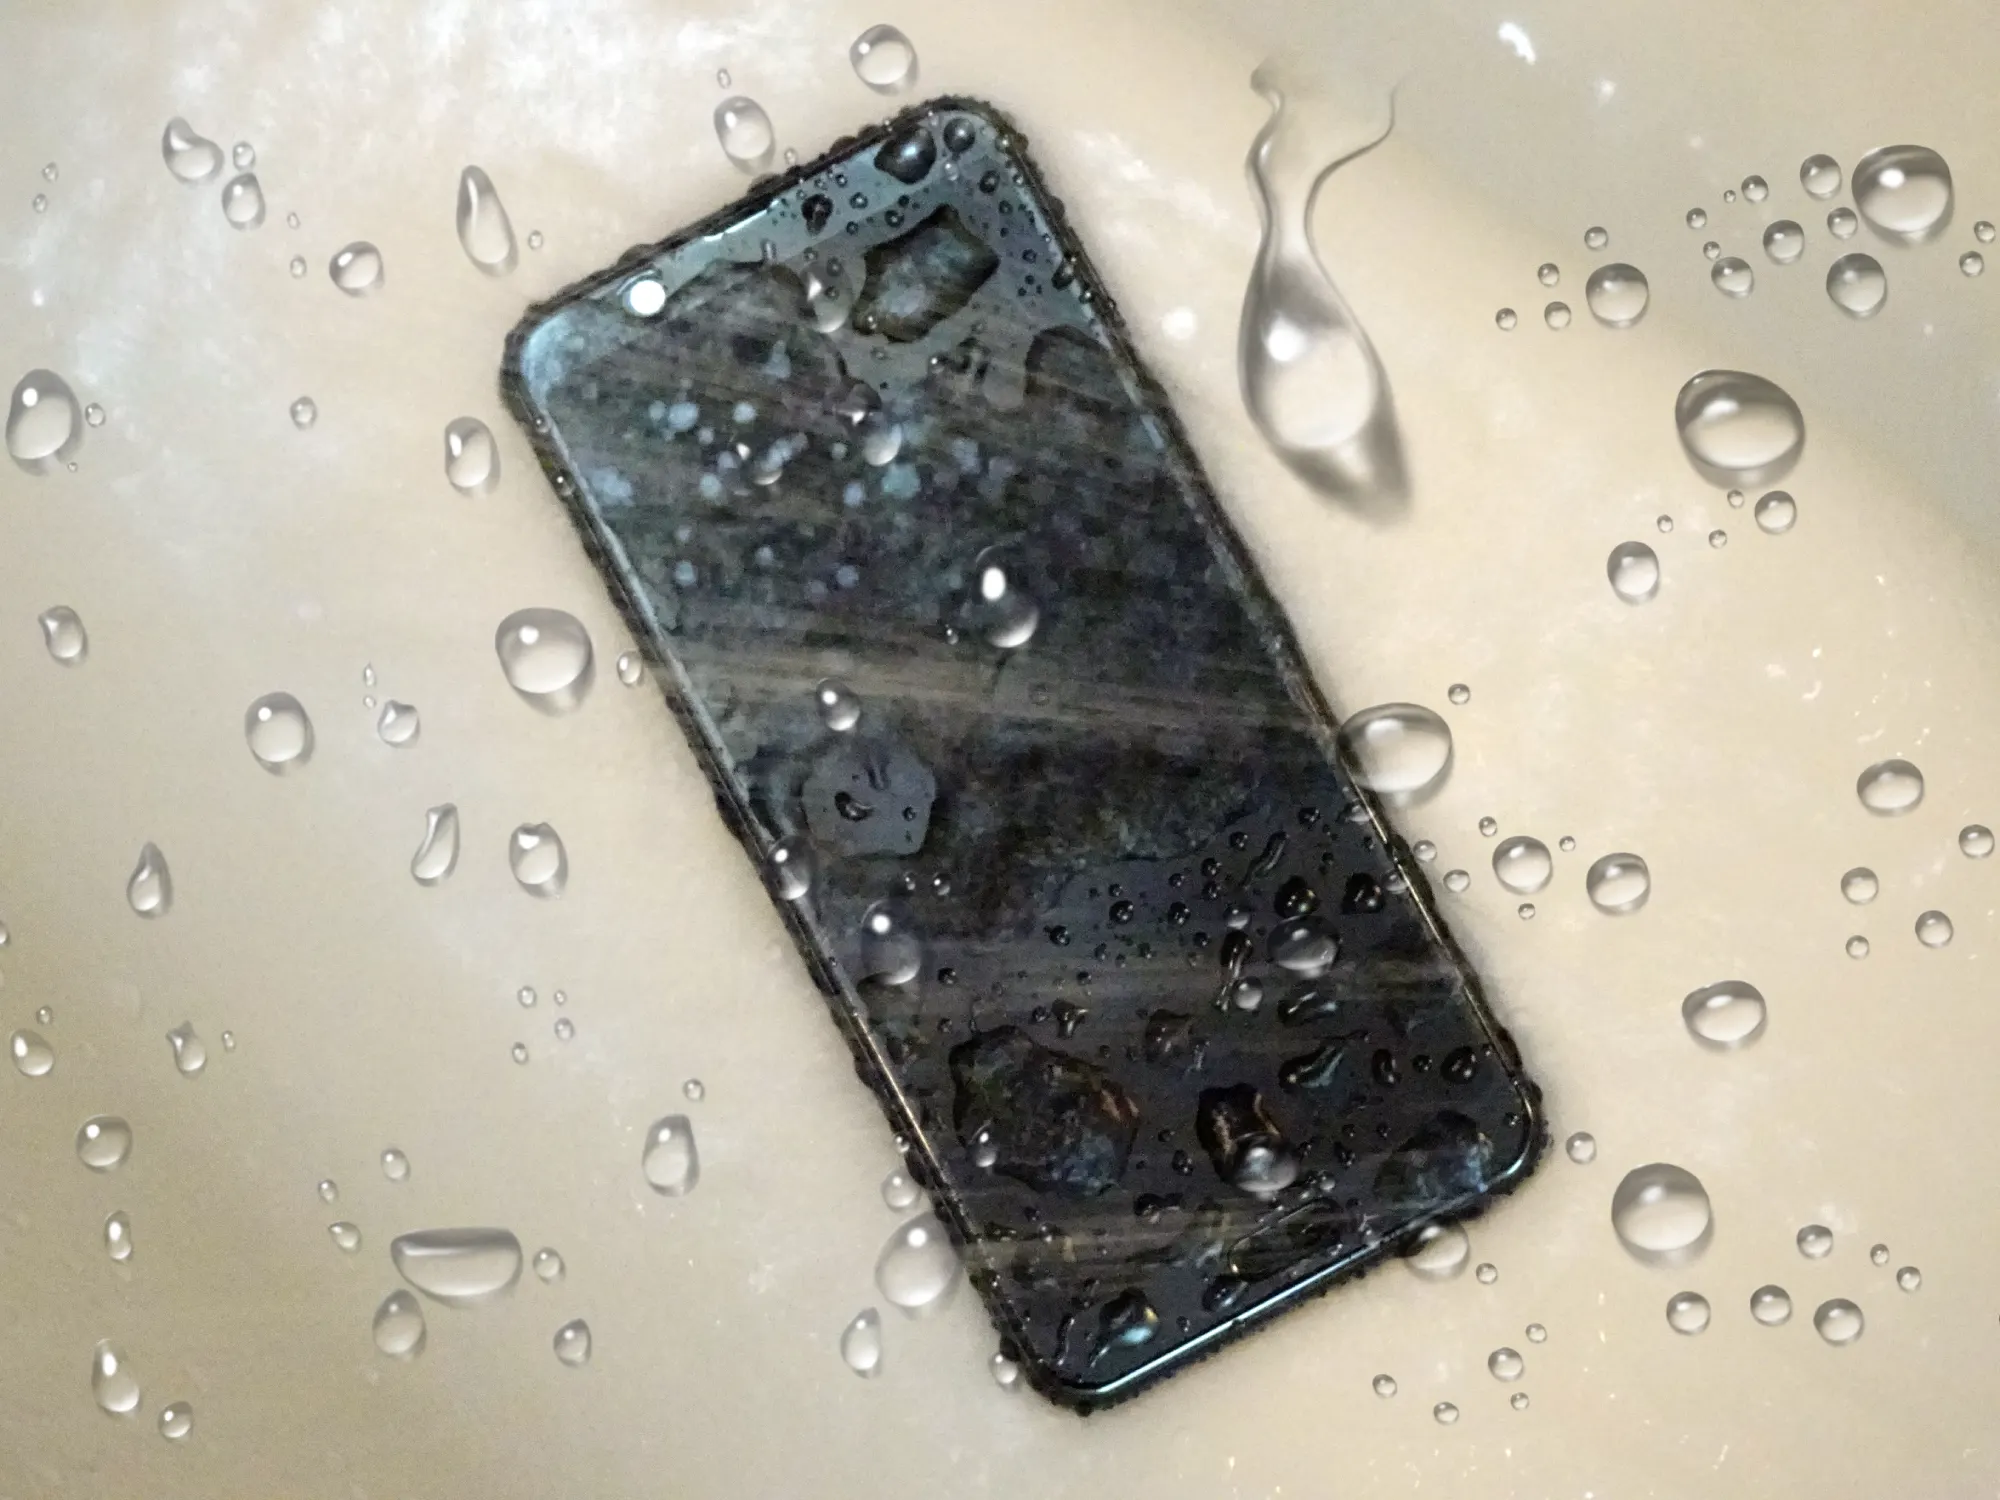 How to Get Water Out of Your Phone